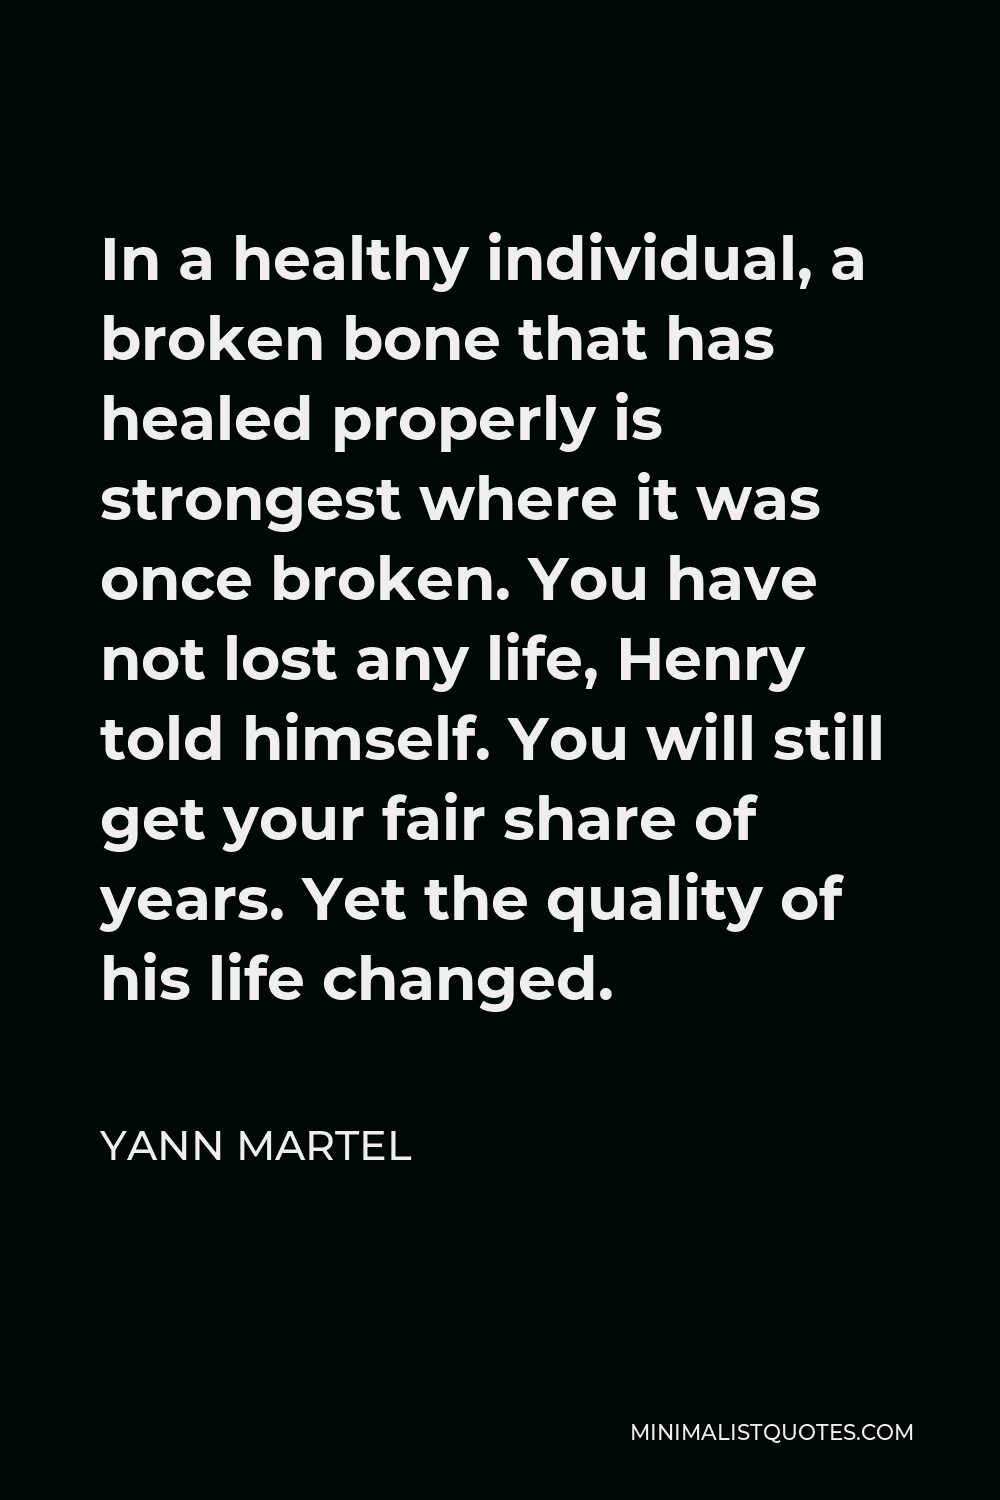 Yann Martel Quote - In a healthy individual, a broken bone that has healed properly is strongest where it was once broken. You have not lost any life, Henry told himself. You will still get your fair share of years. Yet the quality of his life changed.